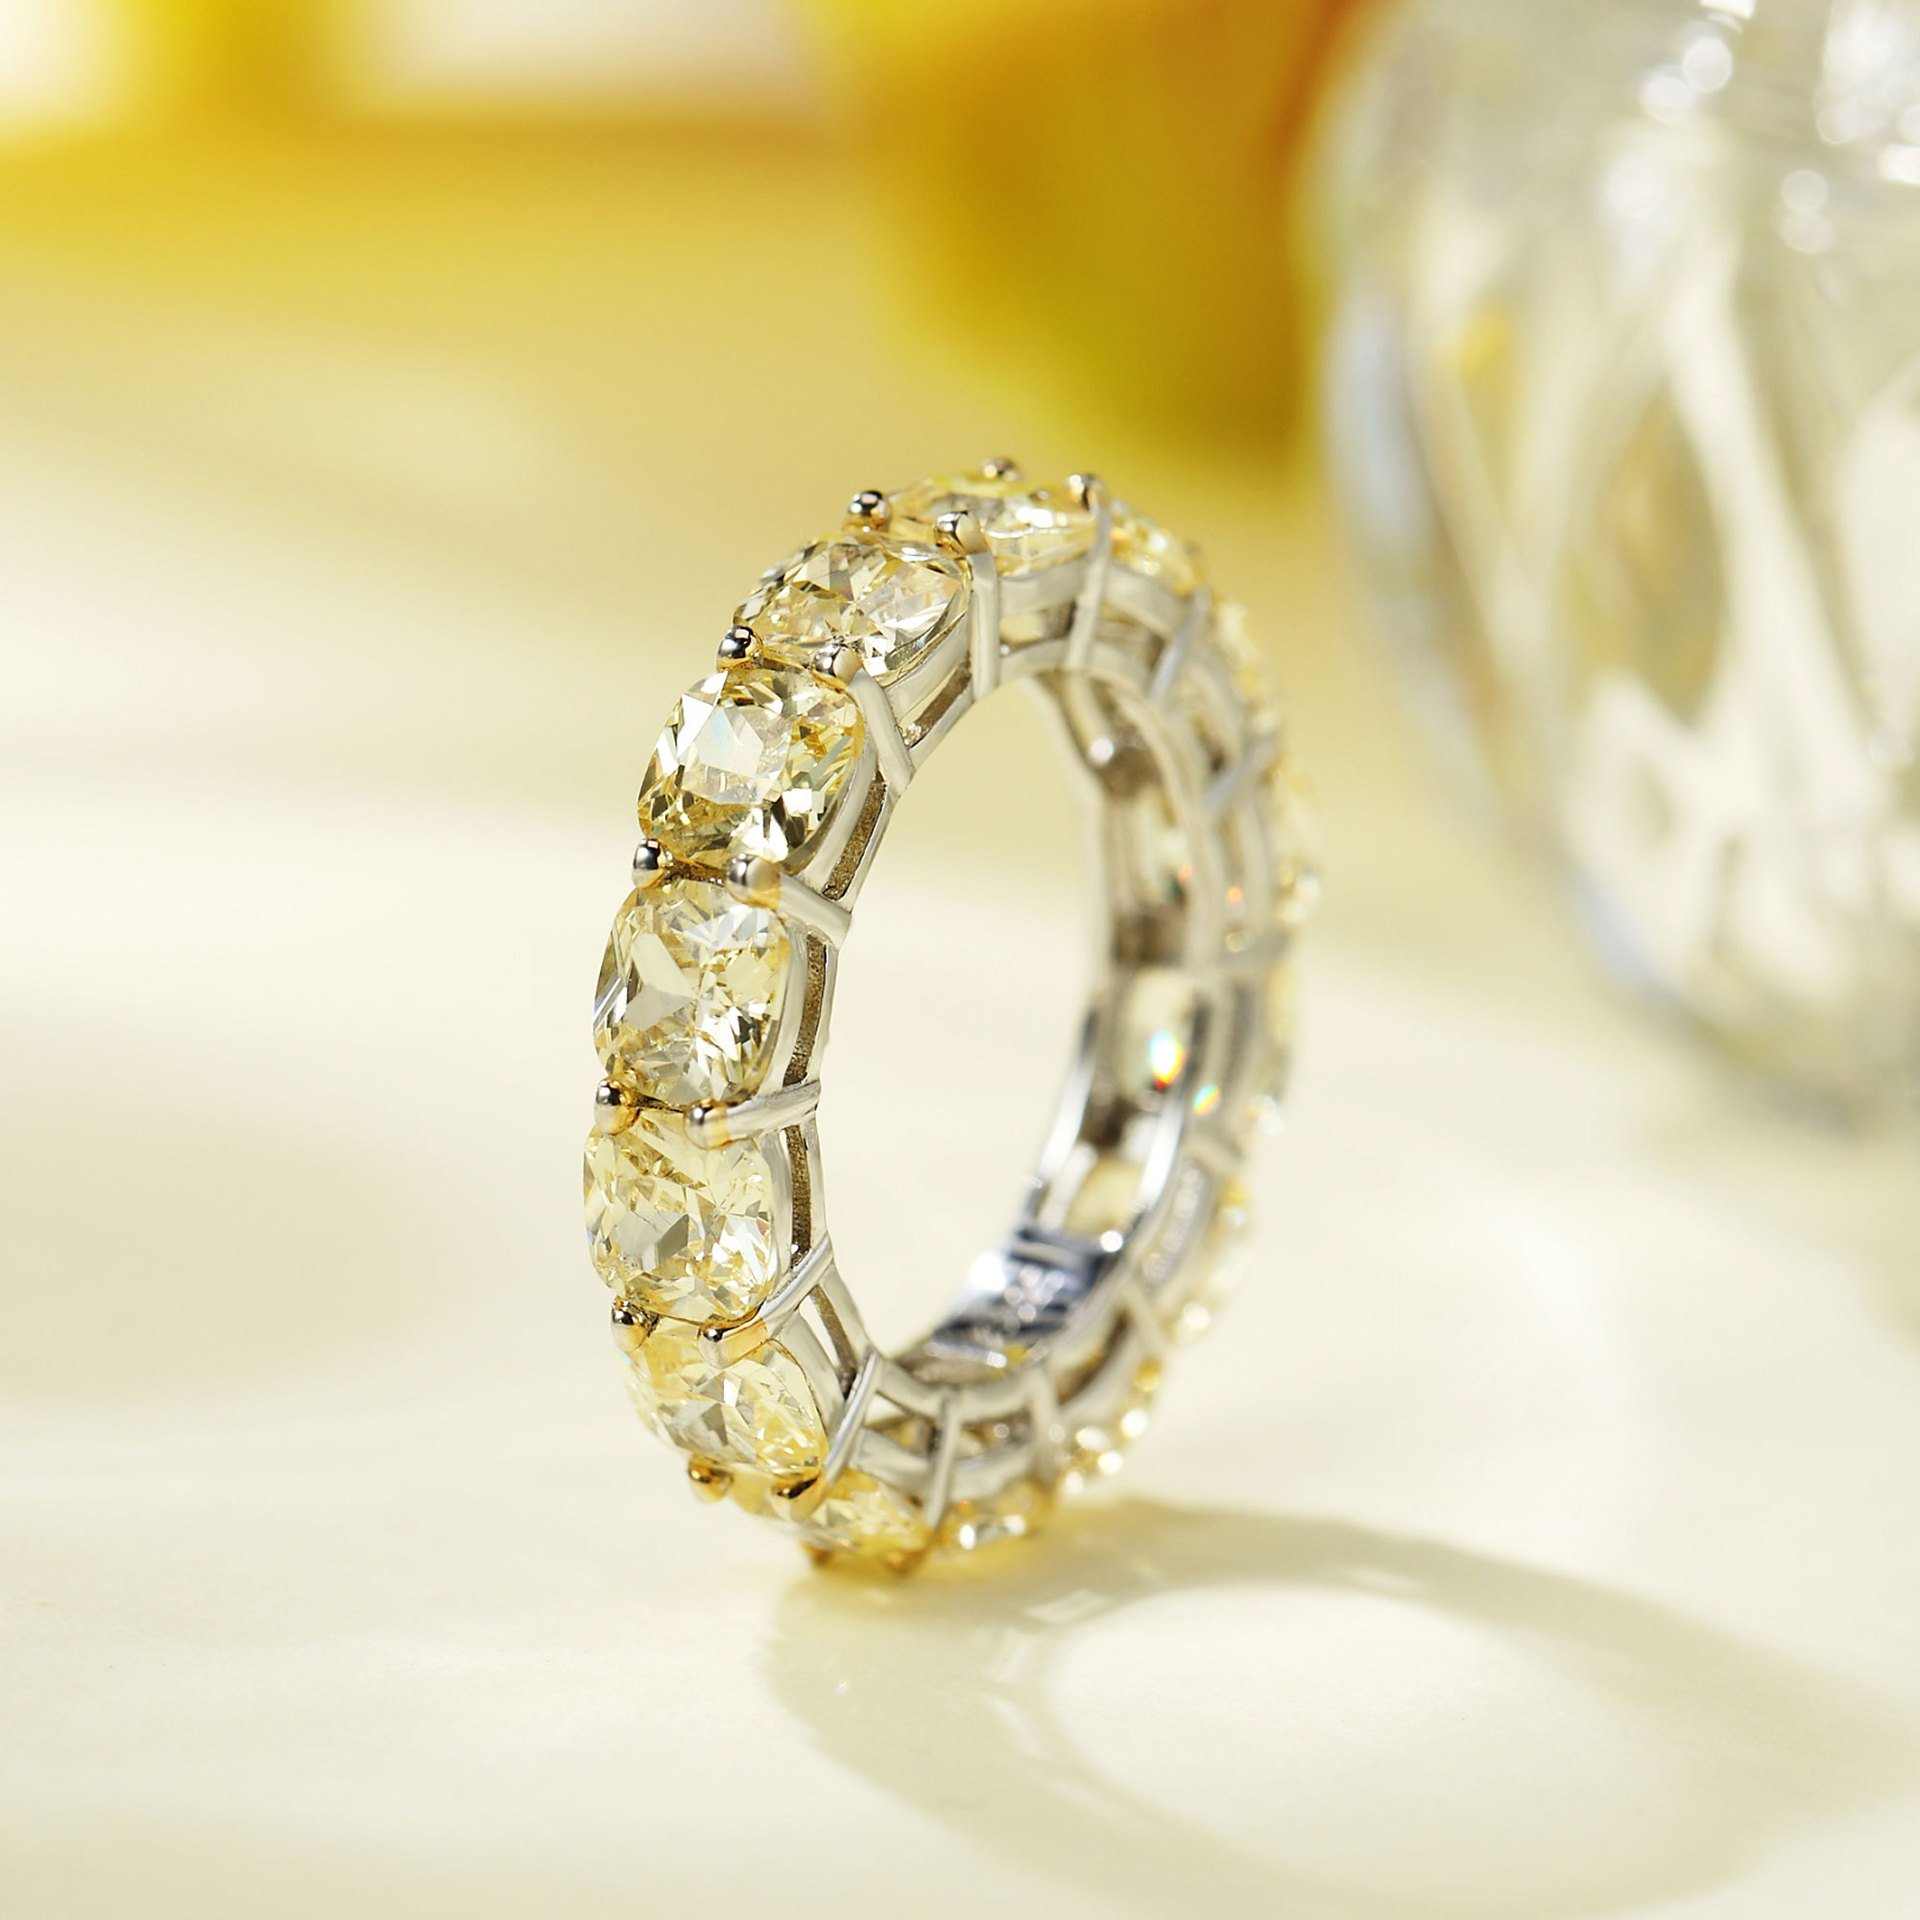 Band Ring with Yellow Diamond - HER'S